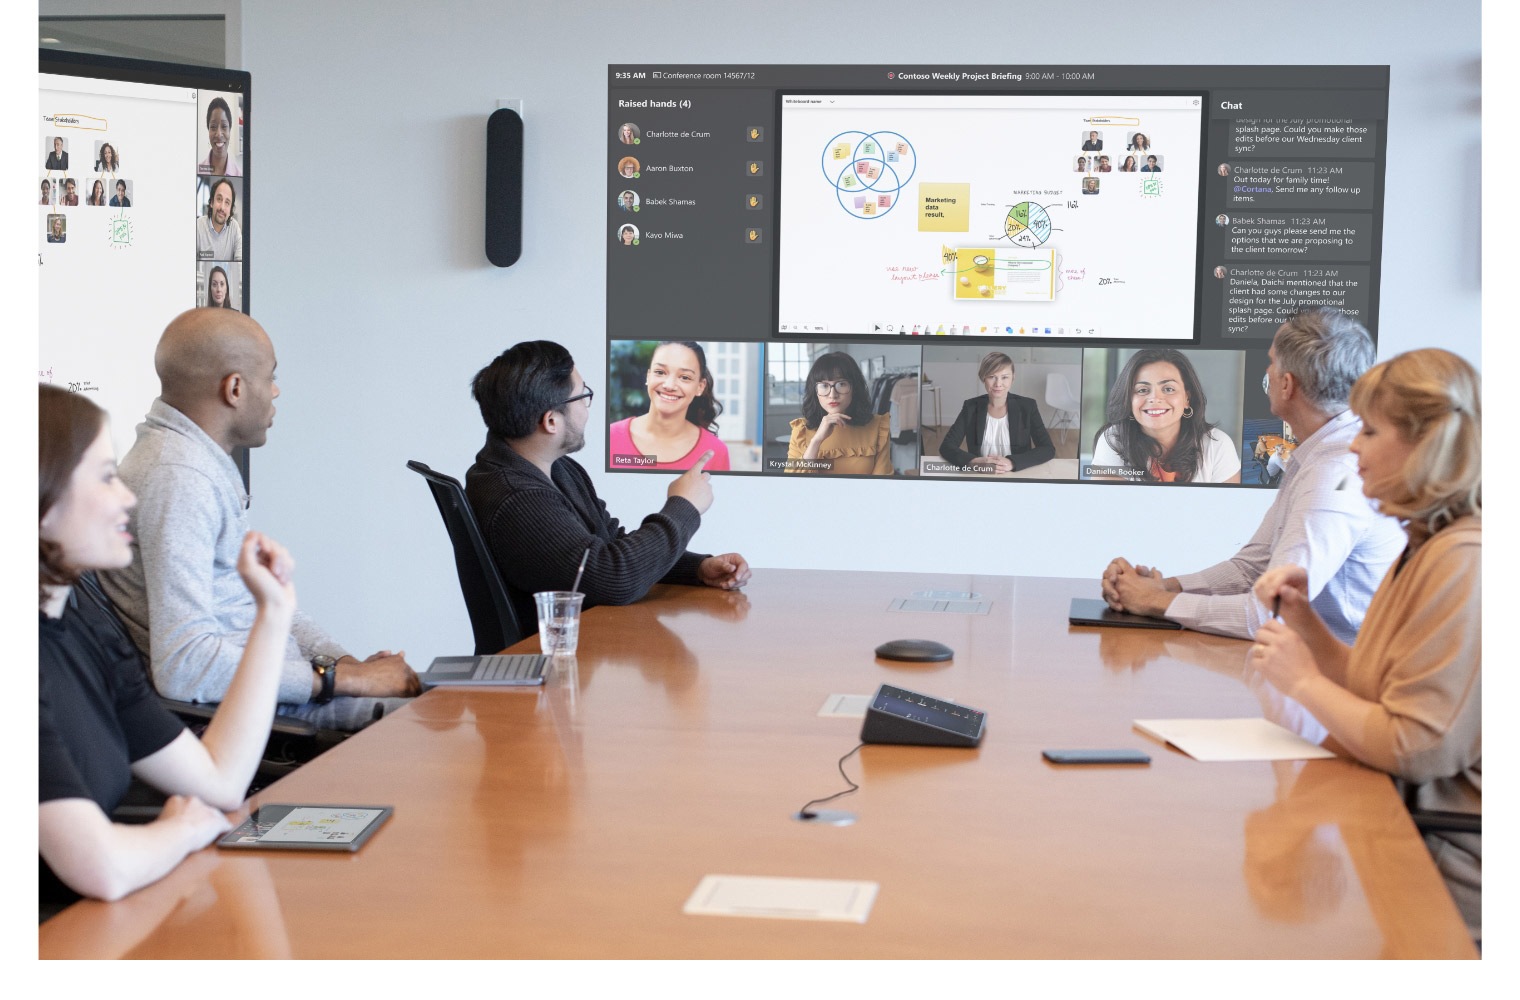 A group of people in a conference room participating in a Teams meeting and a collaborative whiteboard is being worked on together in real time.